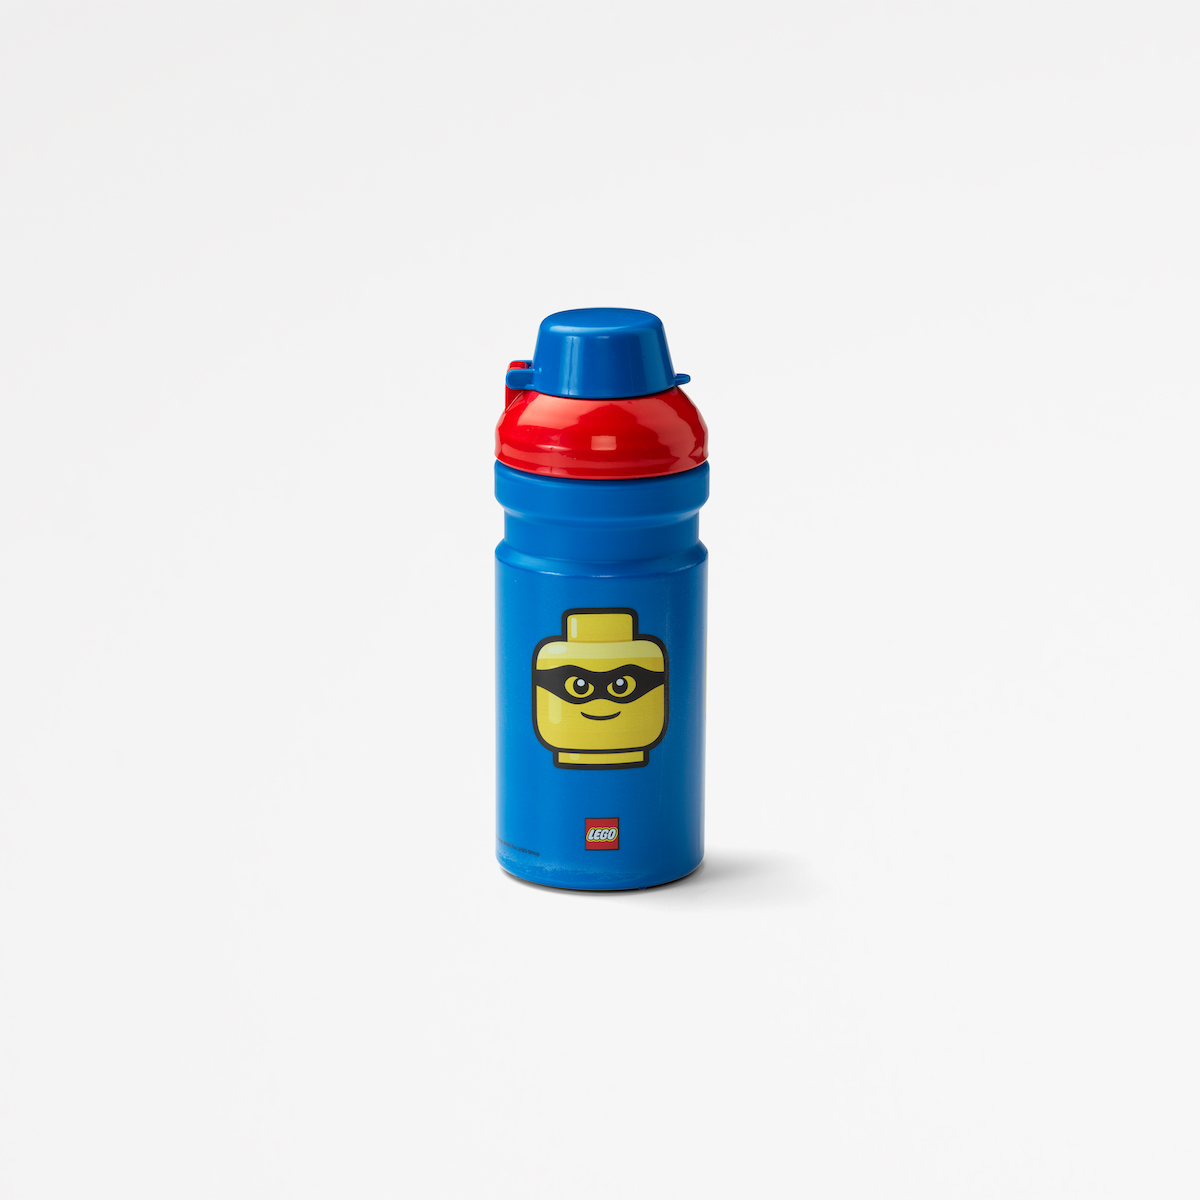 Lego drinking bottle iconic, drinking, collection, lunch, toddler, kid, blue, fun, joy,